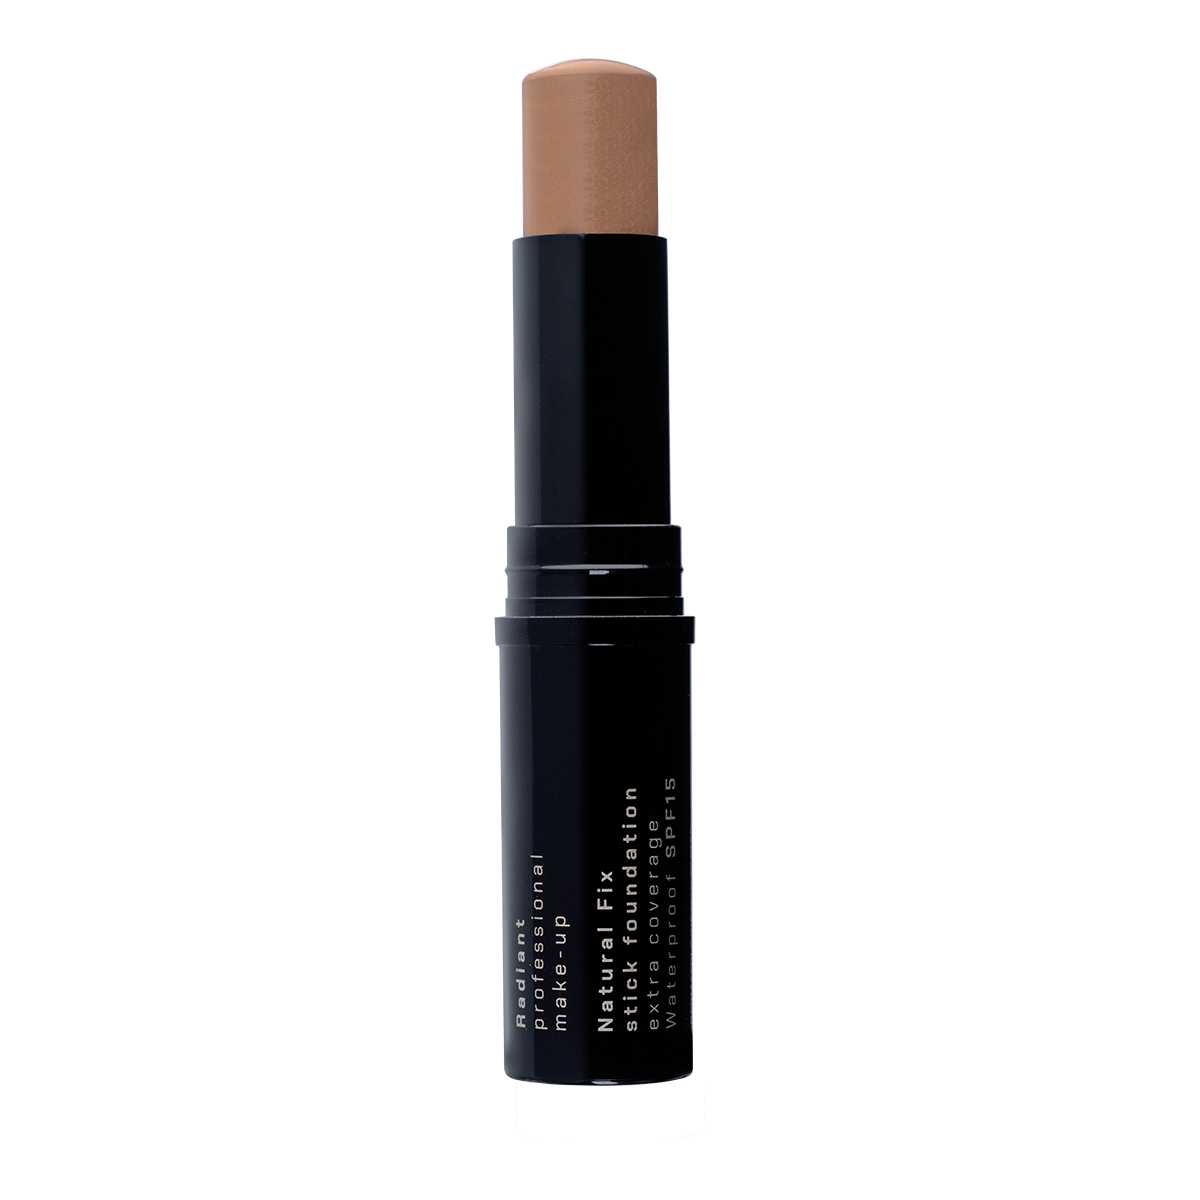 NATURAL FIX EXTRA COVERAGE STICK FOUNDATION  WATERPROOF SPF 15 (07 CINAMMON)